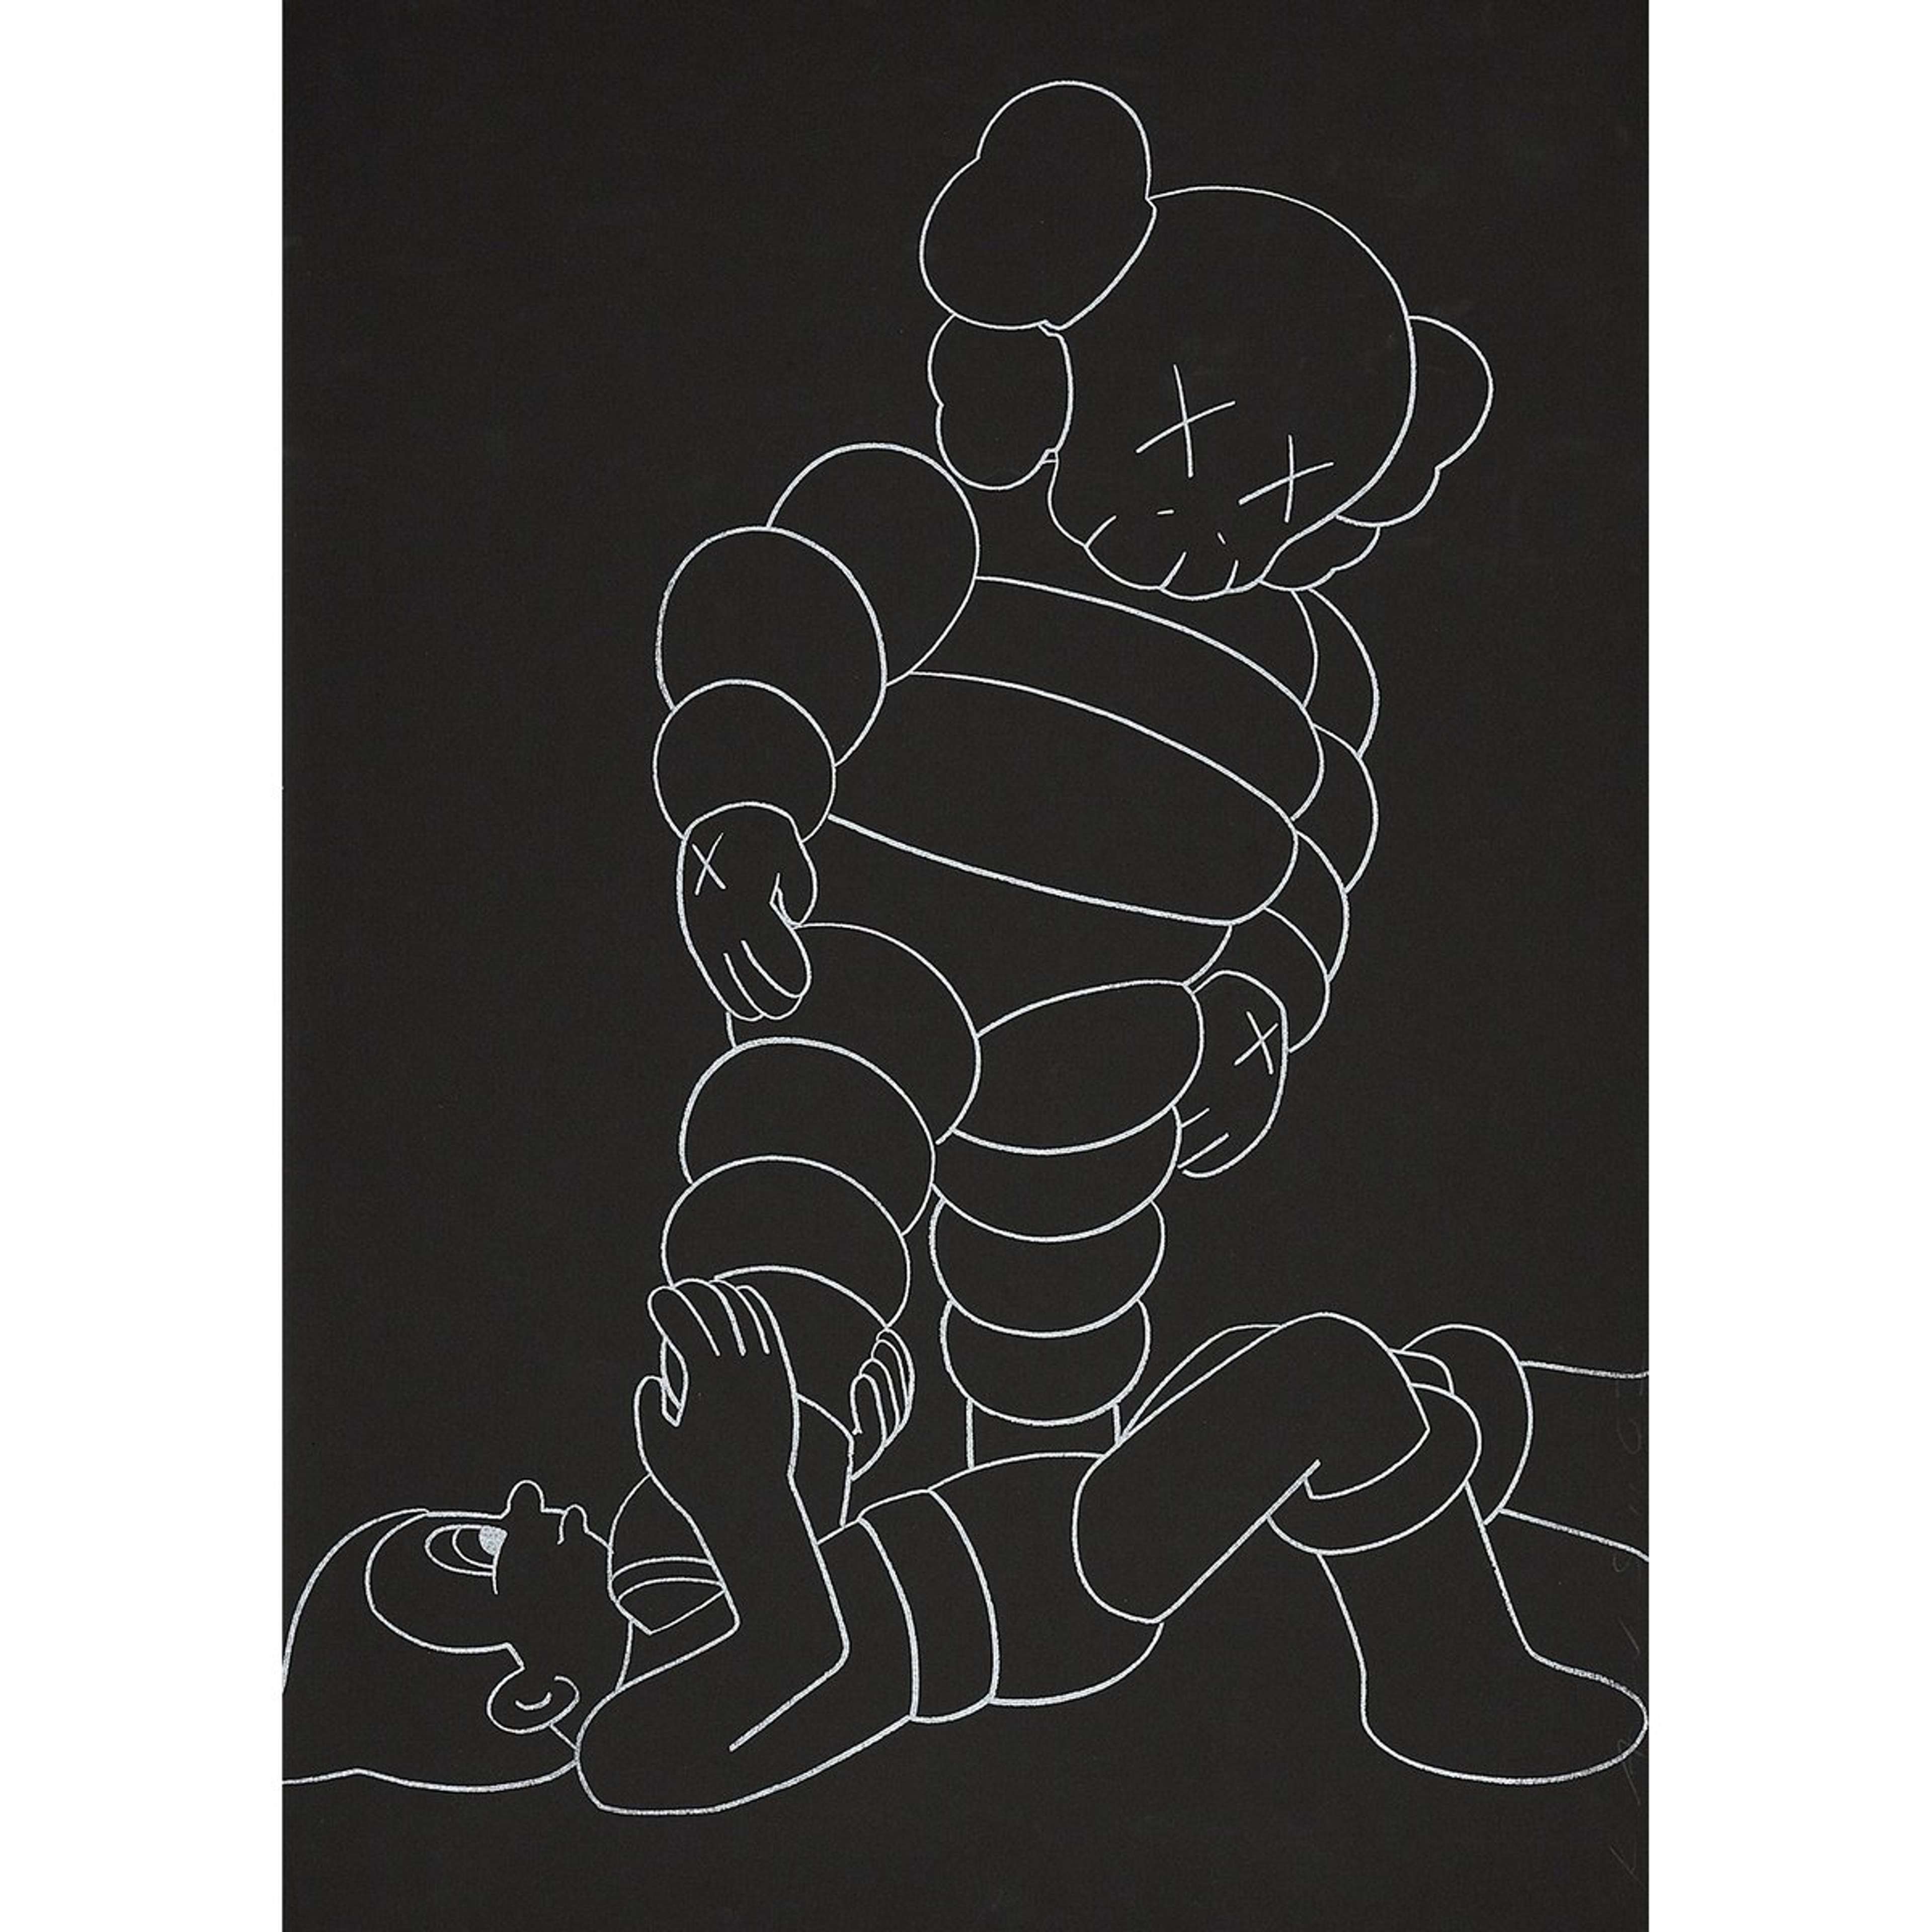 A Buyer’s Guide to KAWS